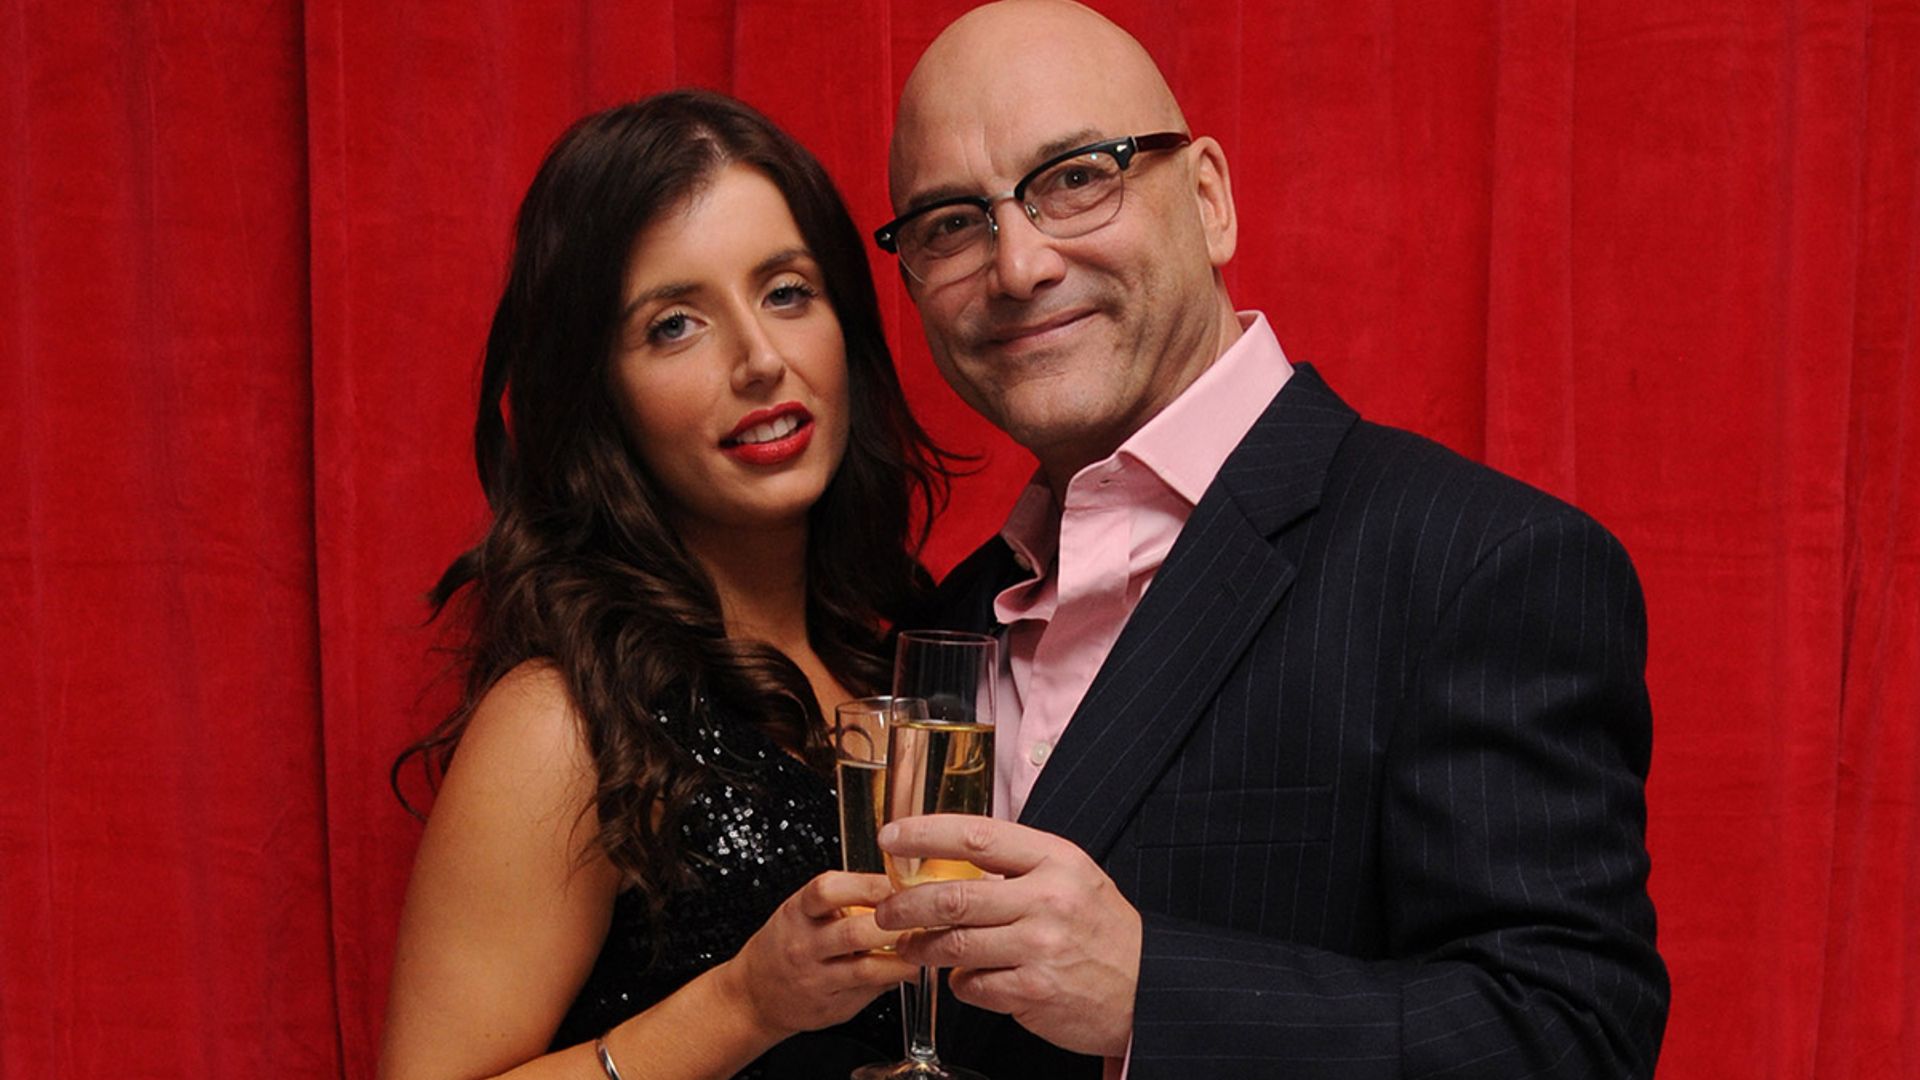 Find out everything you need to know about Gregg Wallace's wife Anne-Marie Sterpini